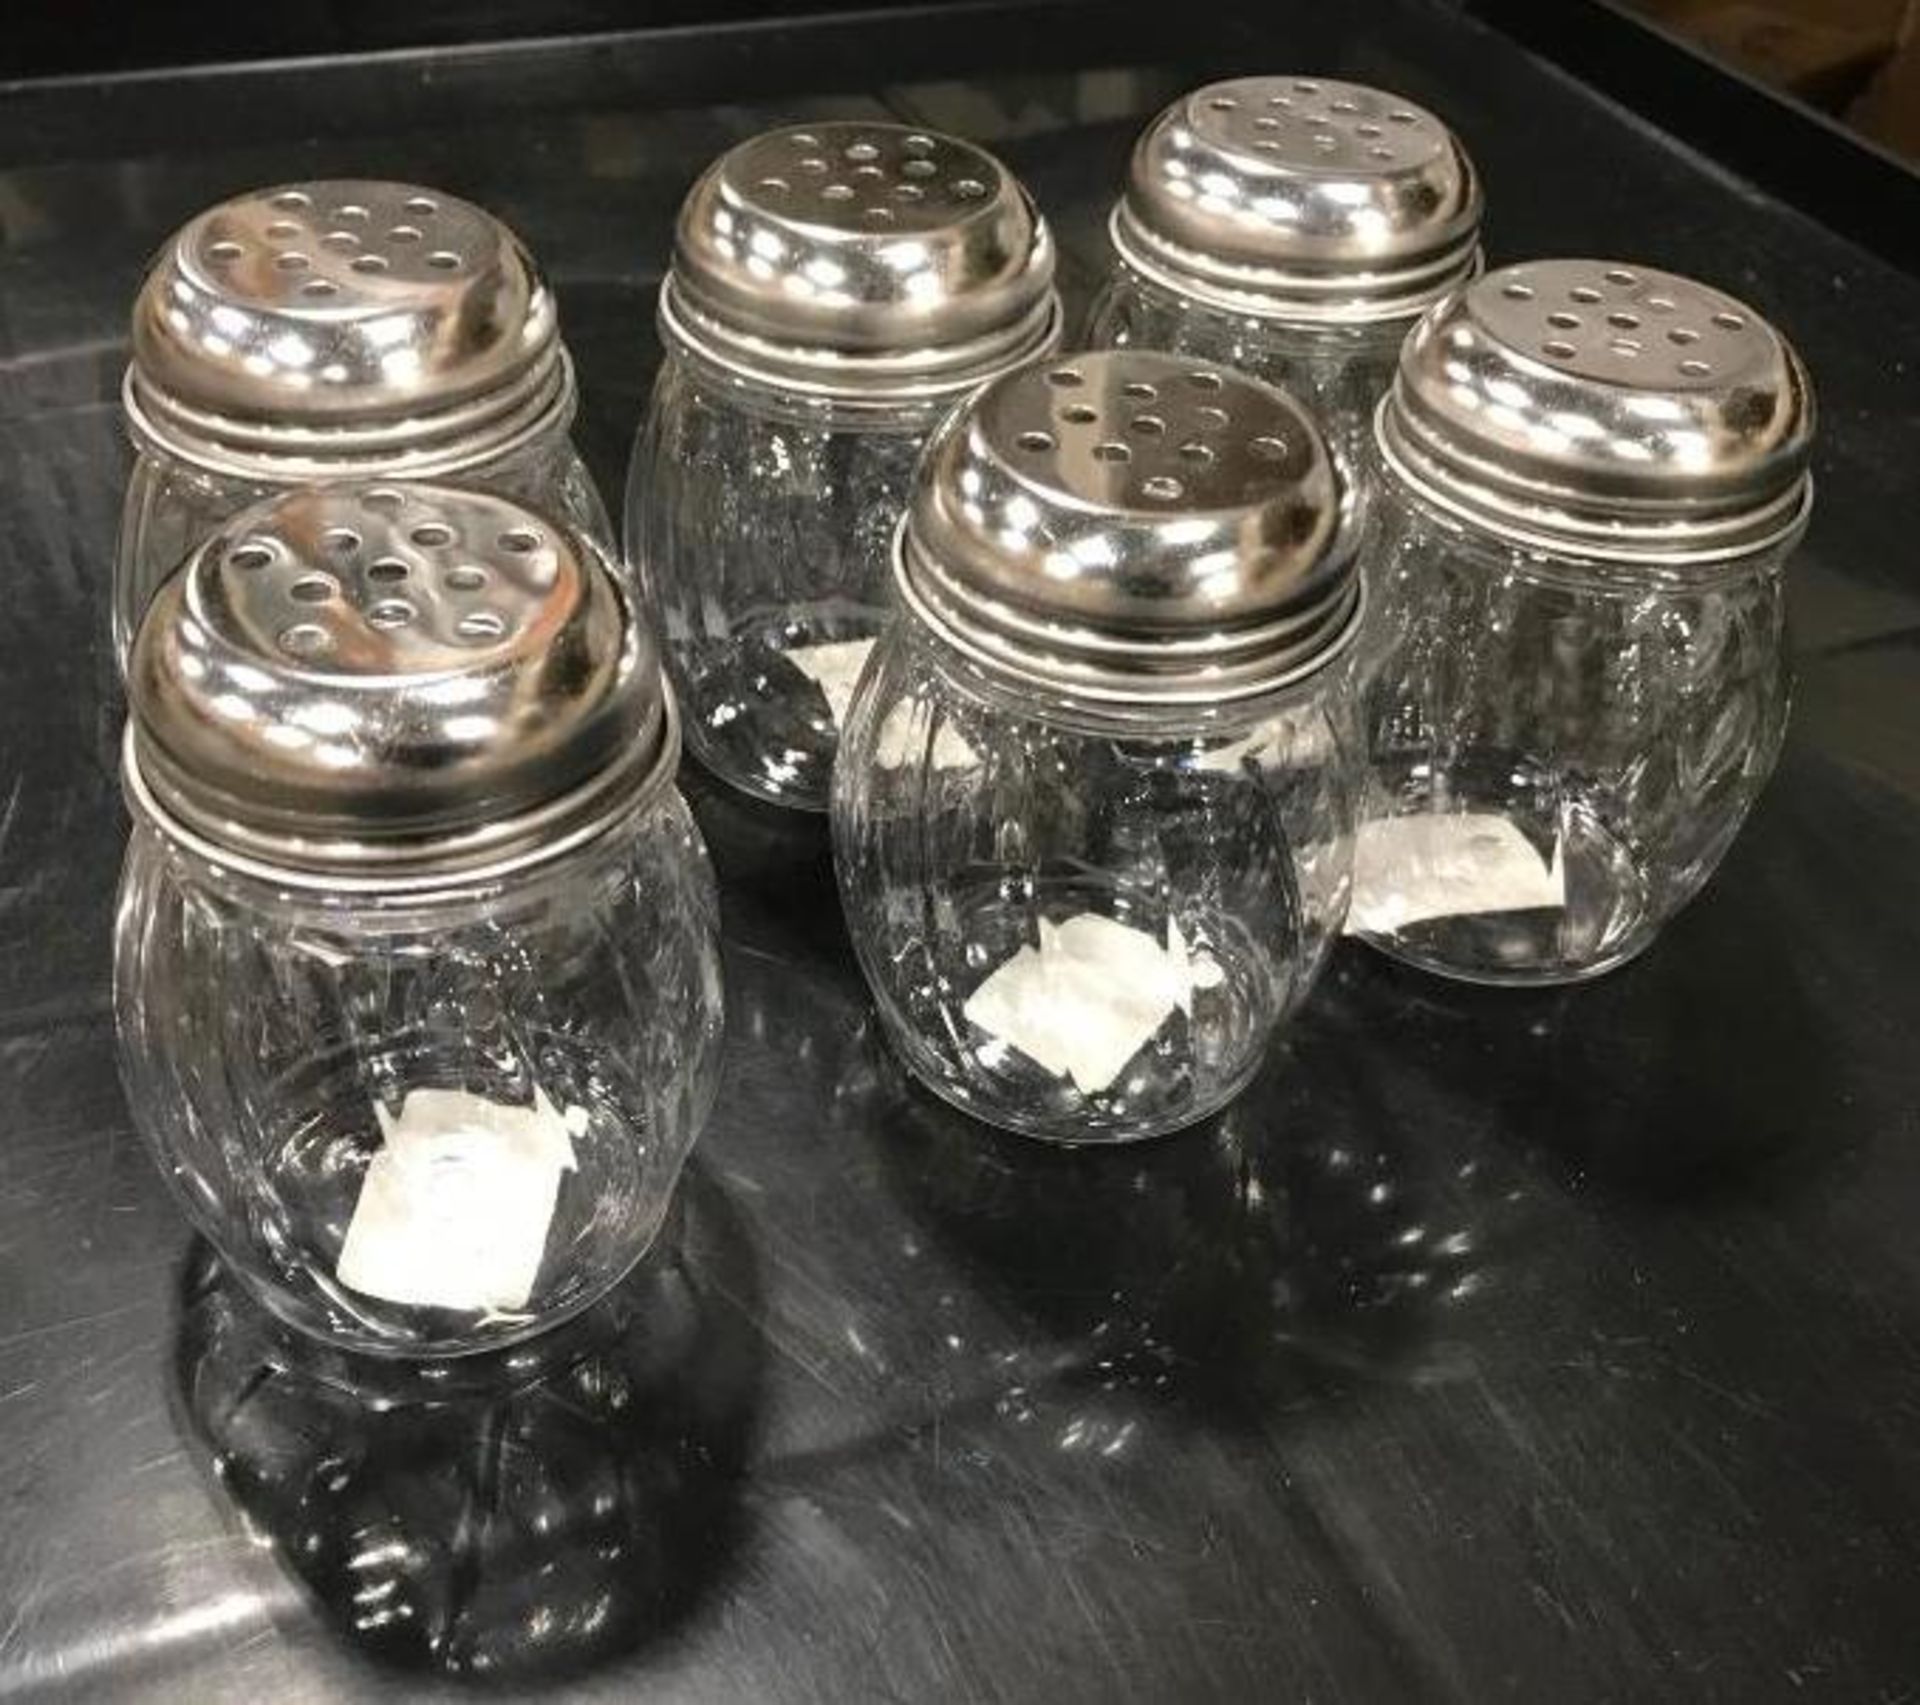 CHEESE SHAKER, 6 OZ, SWIRLED LEXAN JAR, STAINLESS STEEL PERFORATED TOP, LOT OF 6 - NEW - Image 3 of 3